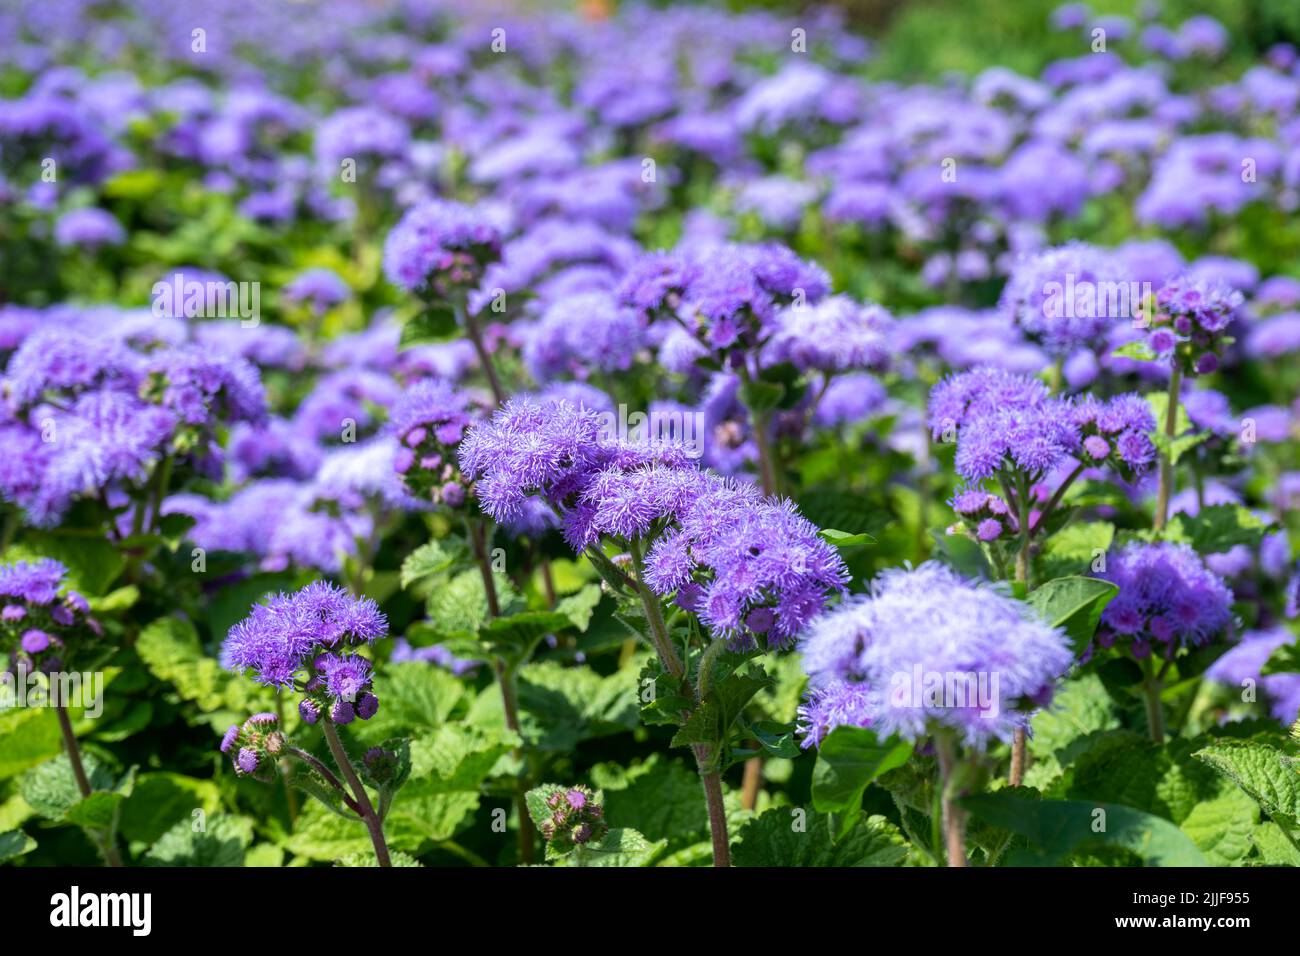 Selective focus of Ageratum billy goat weed flowers. Small purple grass flowers in the garden on blurred background. Stock Photo